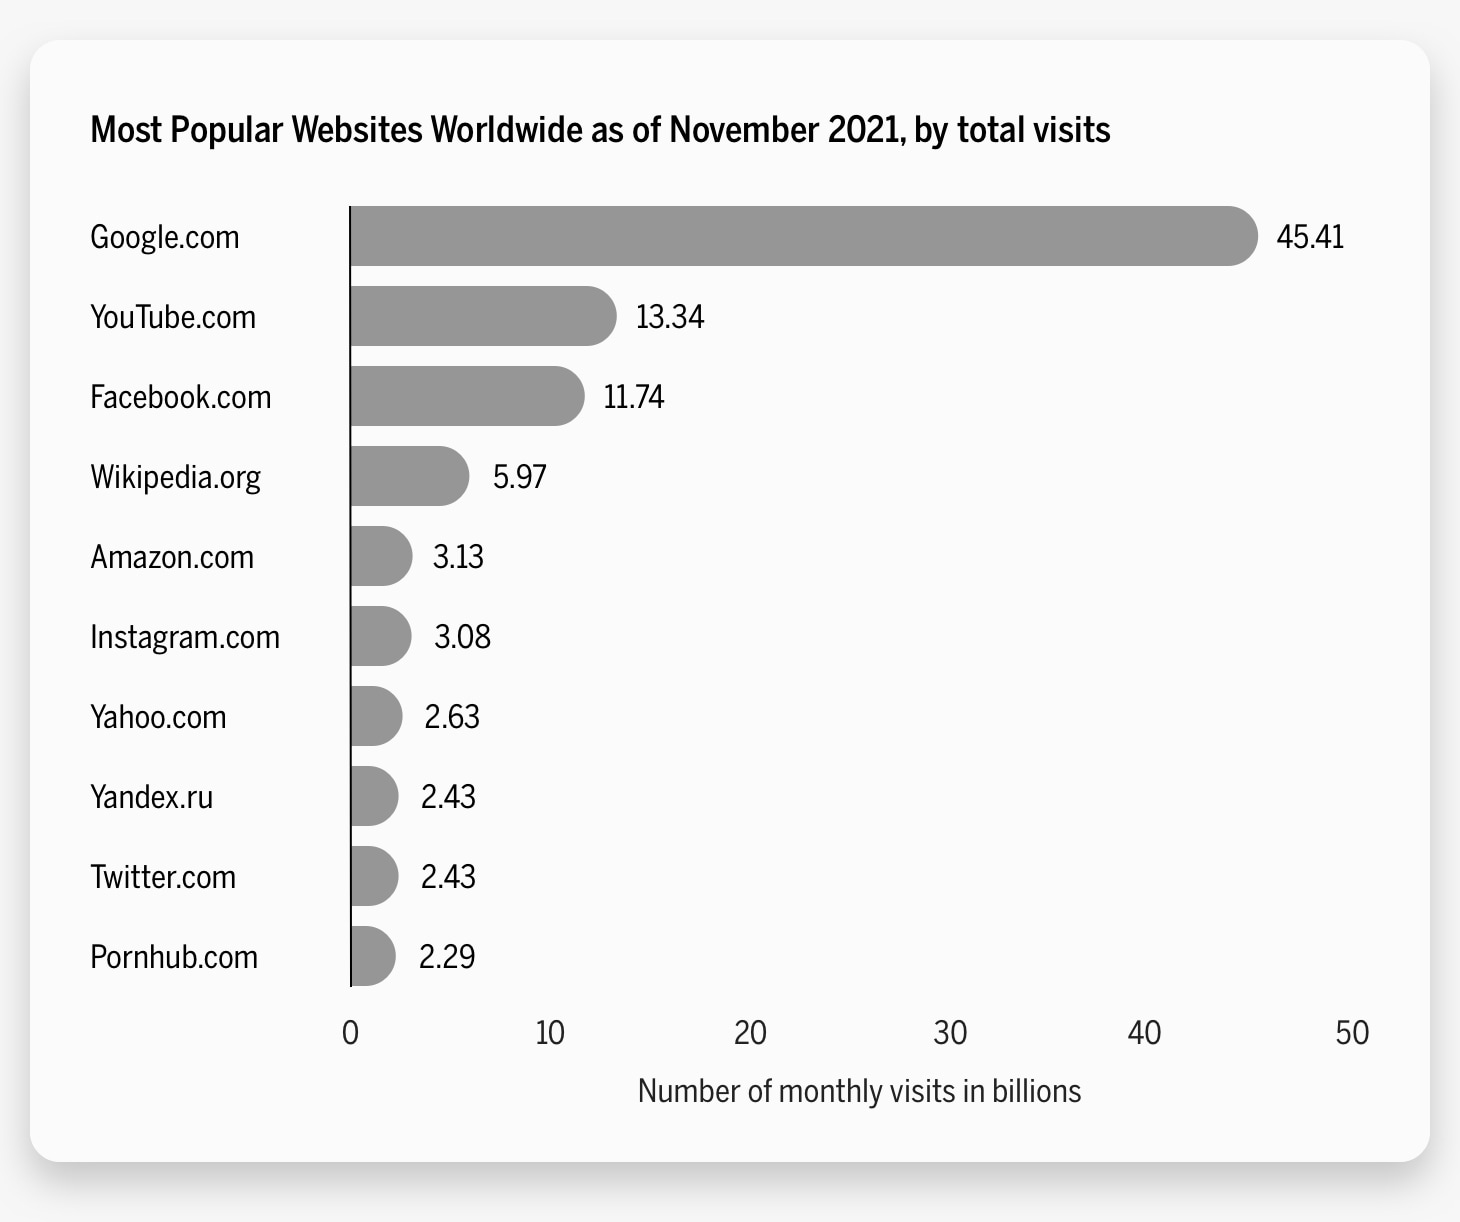 Most Popular Websites Worldwide as of November 2021, by total visits chart